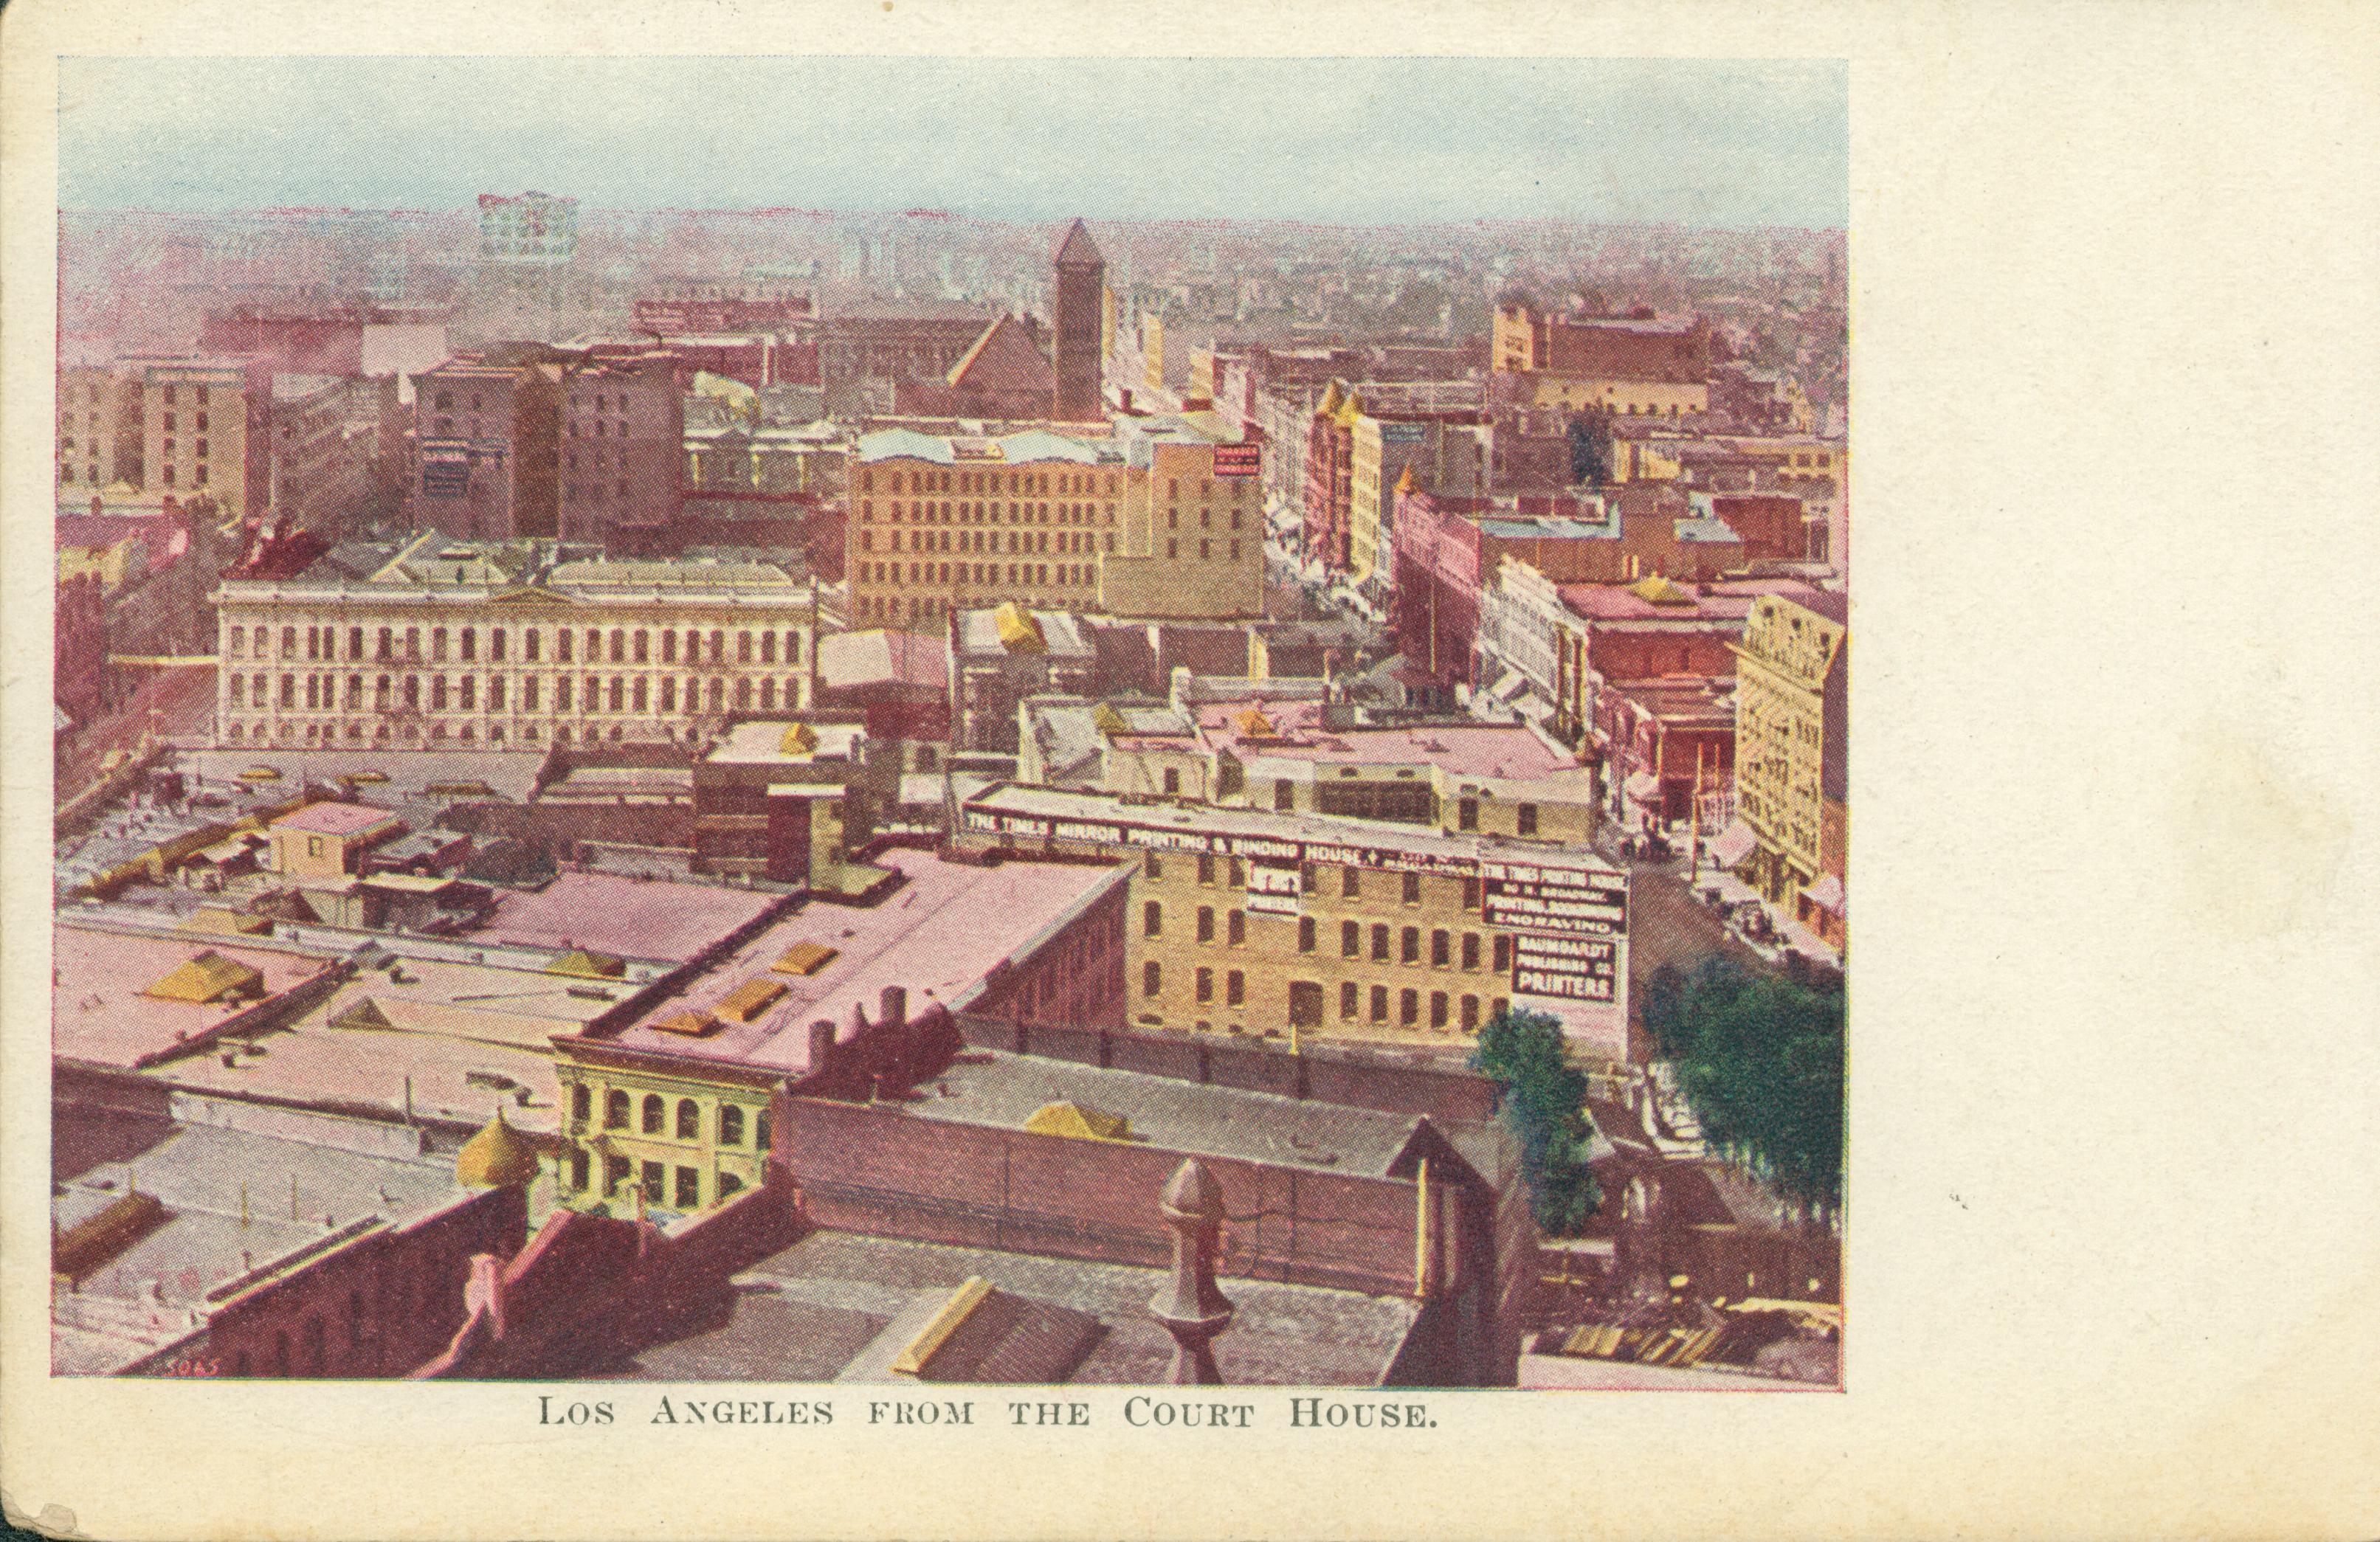 This postcard shows a bird's eye view of Los Angeles